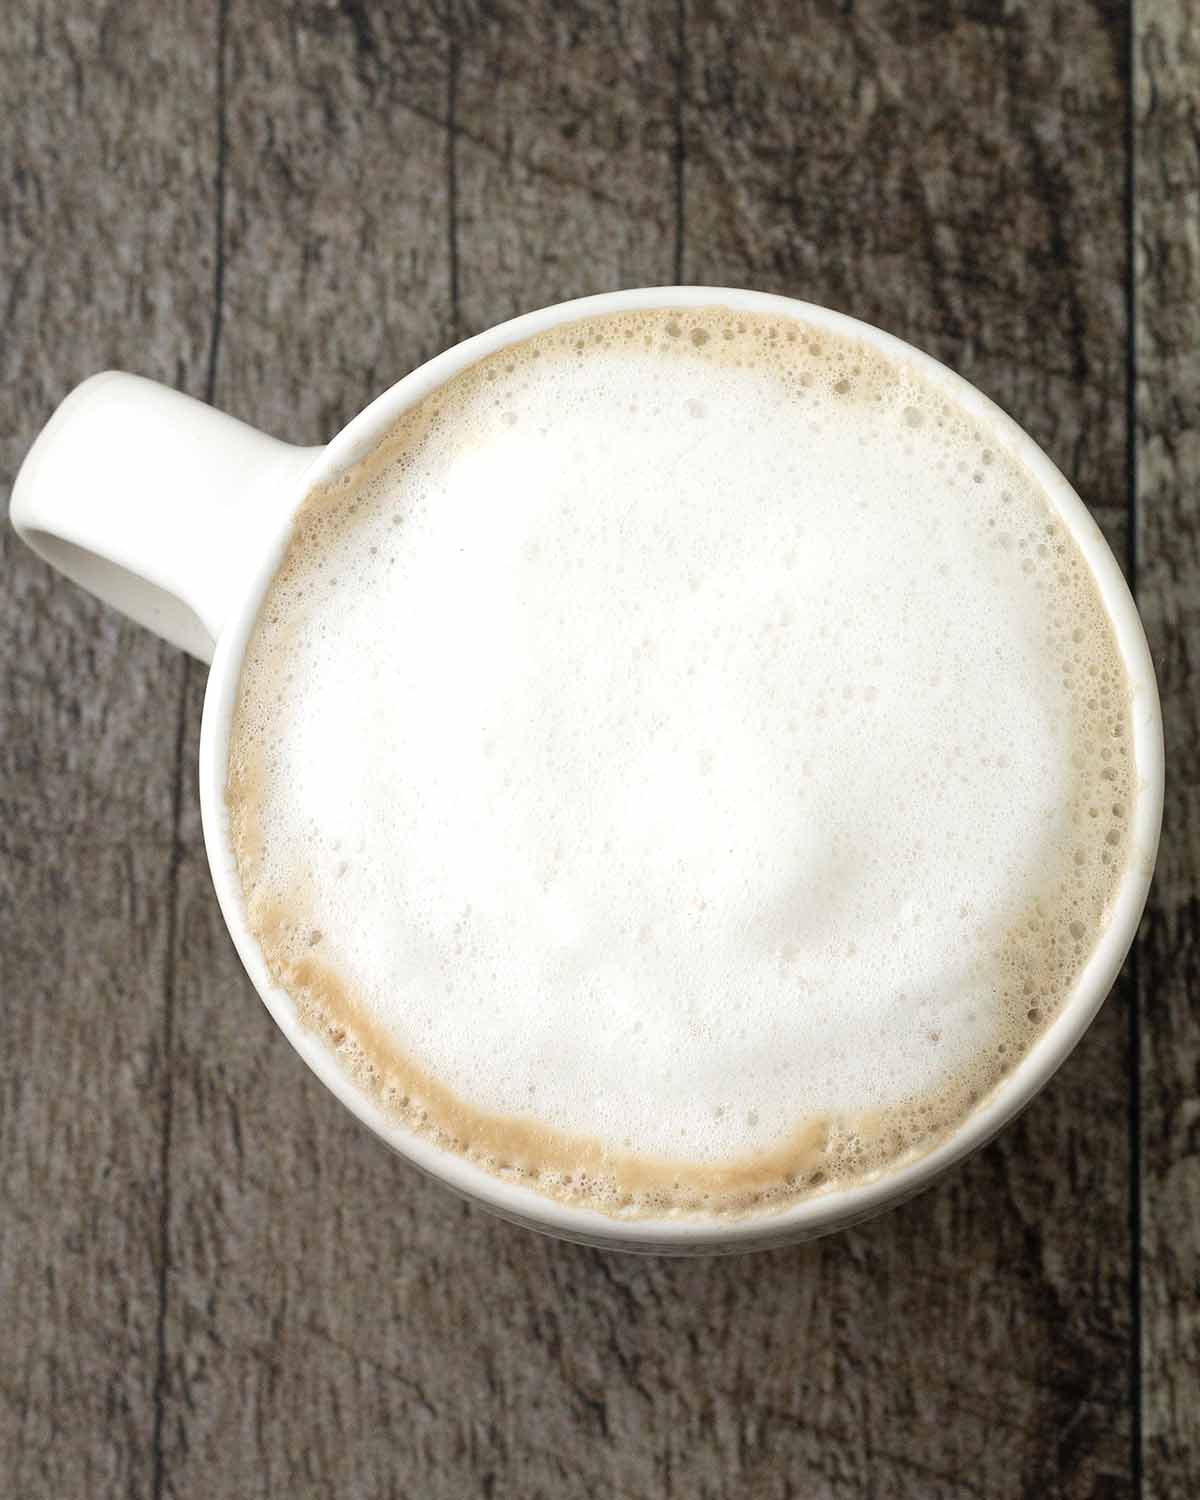 How to Make an Almond Milk Latte at Home